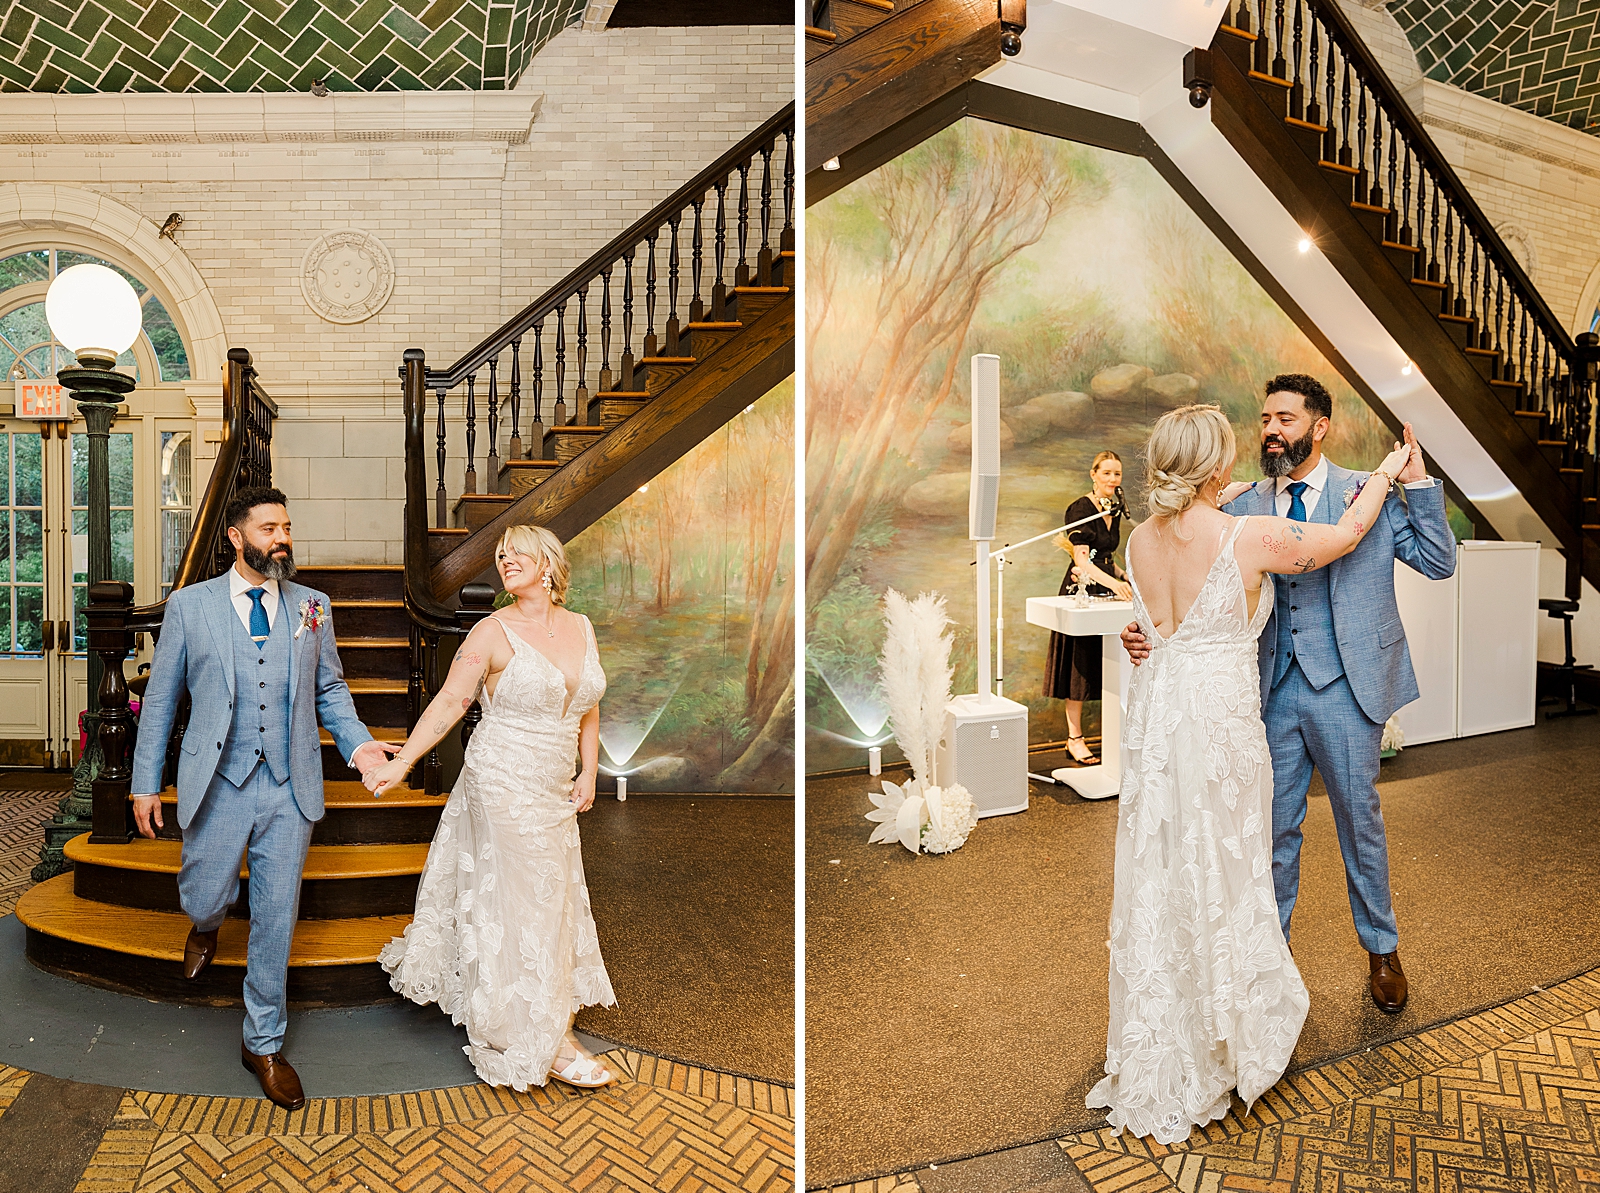 Left: Shot of MK and Eliseo making their way into the reception space hand in hand after being announced as husband and wife.
Right: Shot of MK and Eliseo dancing together in front of the DJ.